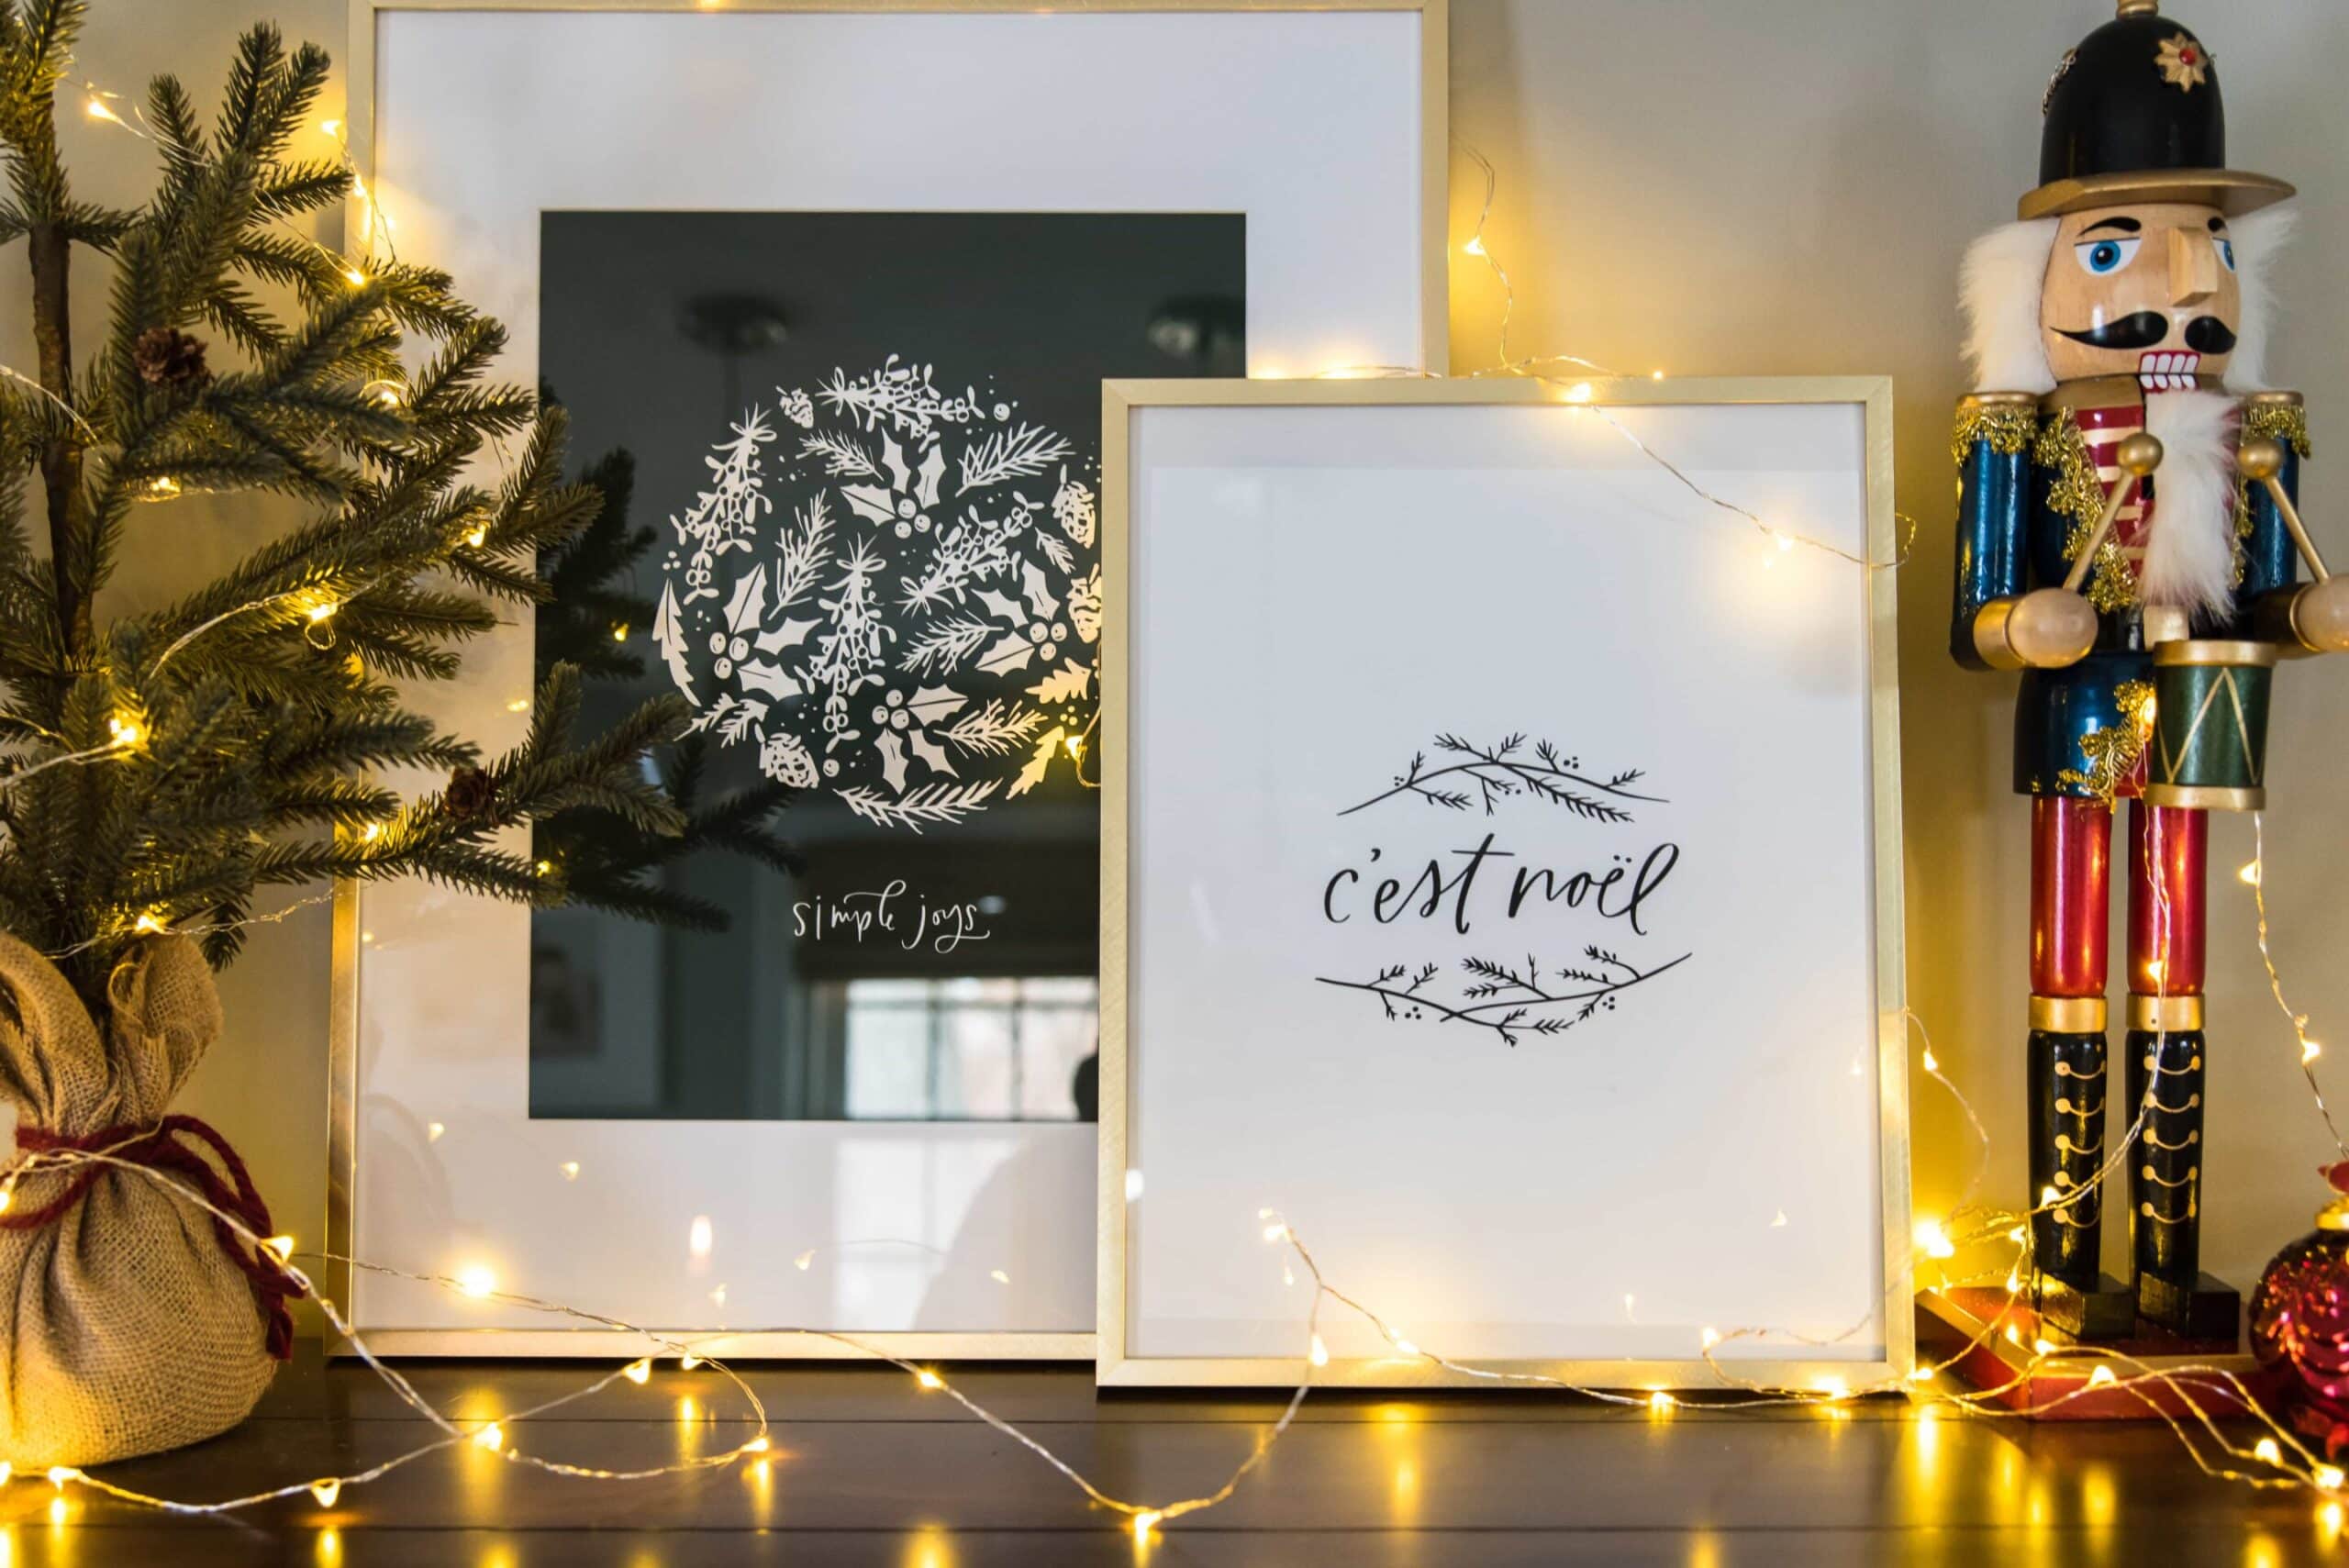 Two Christmas art prints resting on a console table in the dining room.